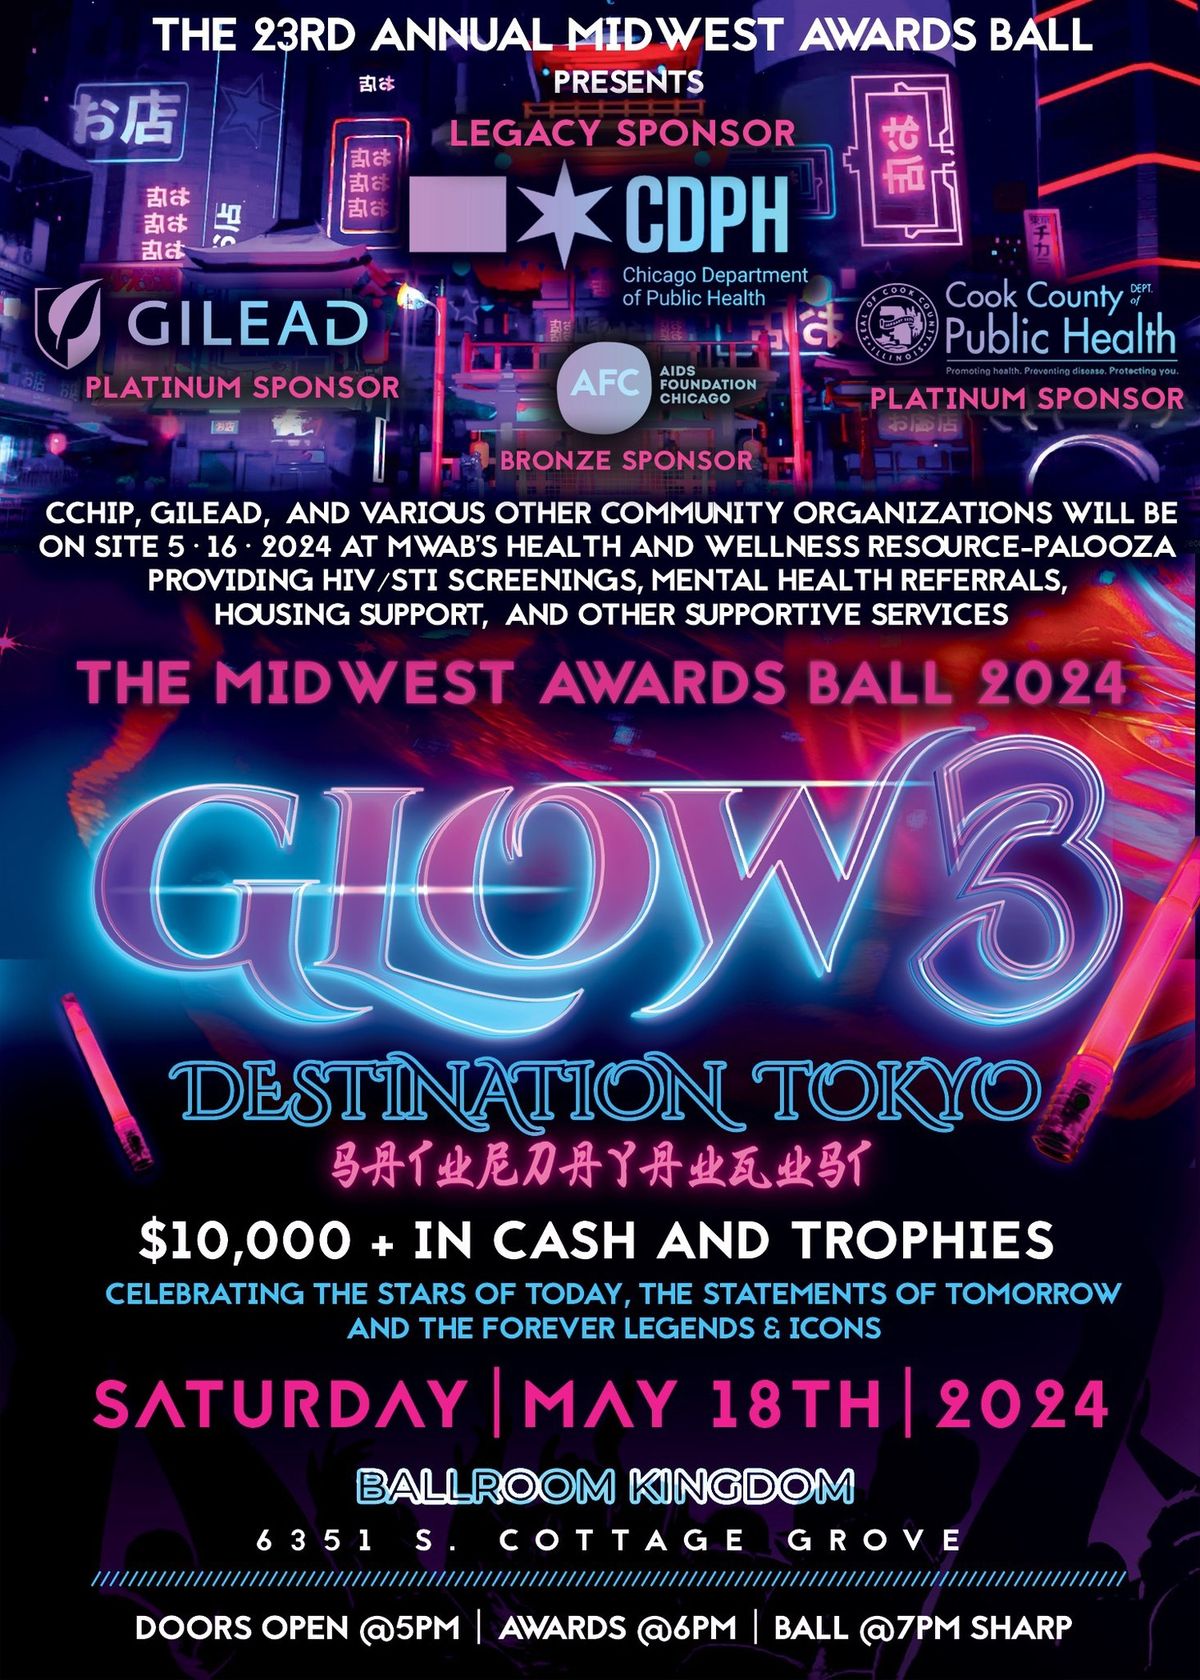 23rd Annual Midwest Awards Ball: GLOW 3 | Destination Tokyo